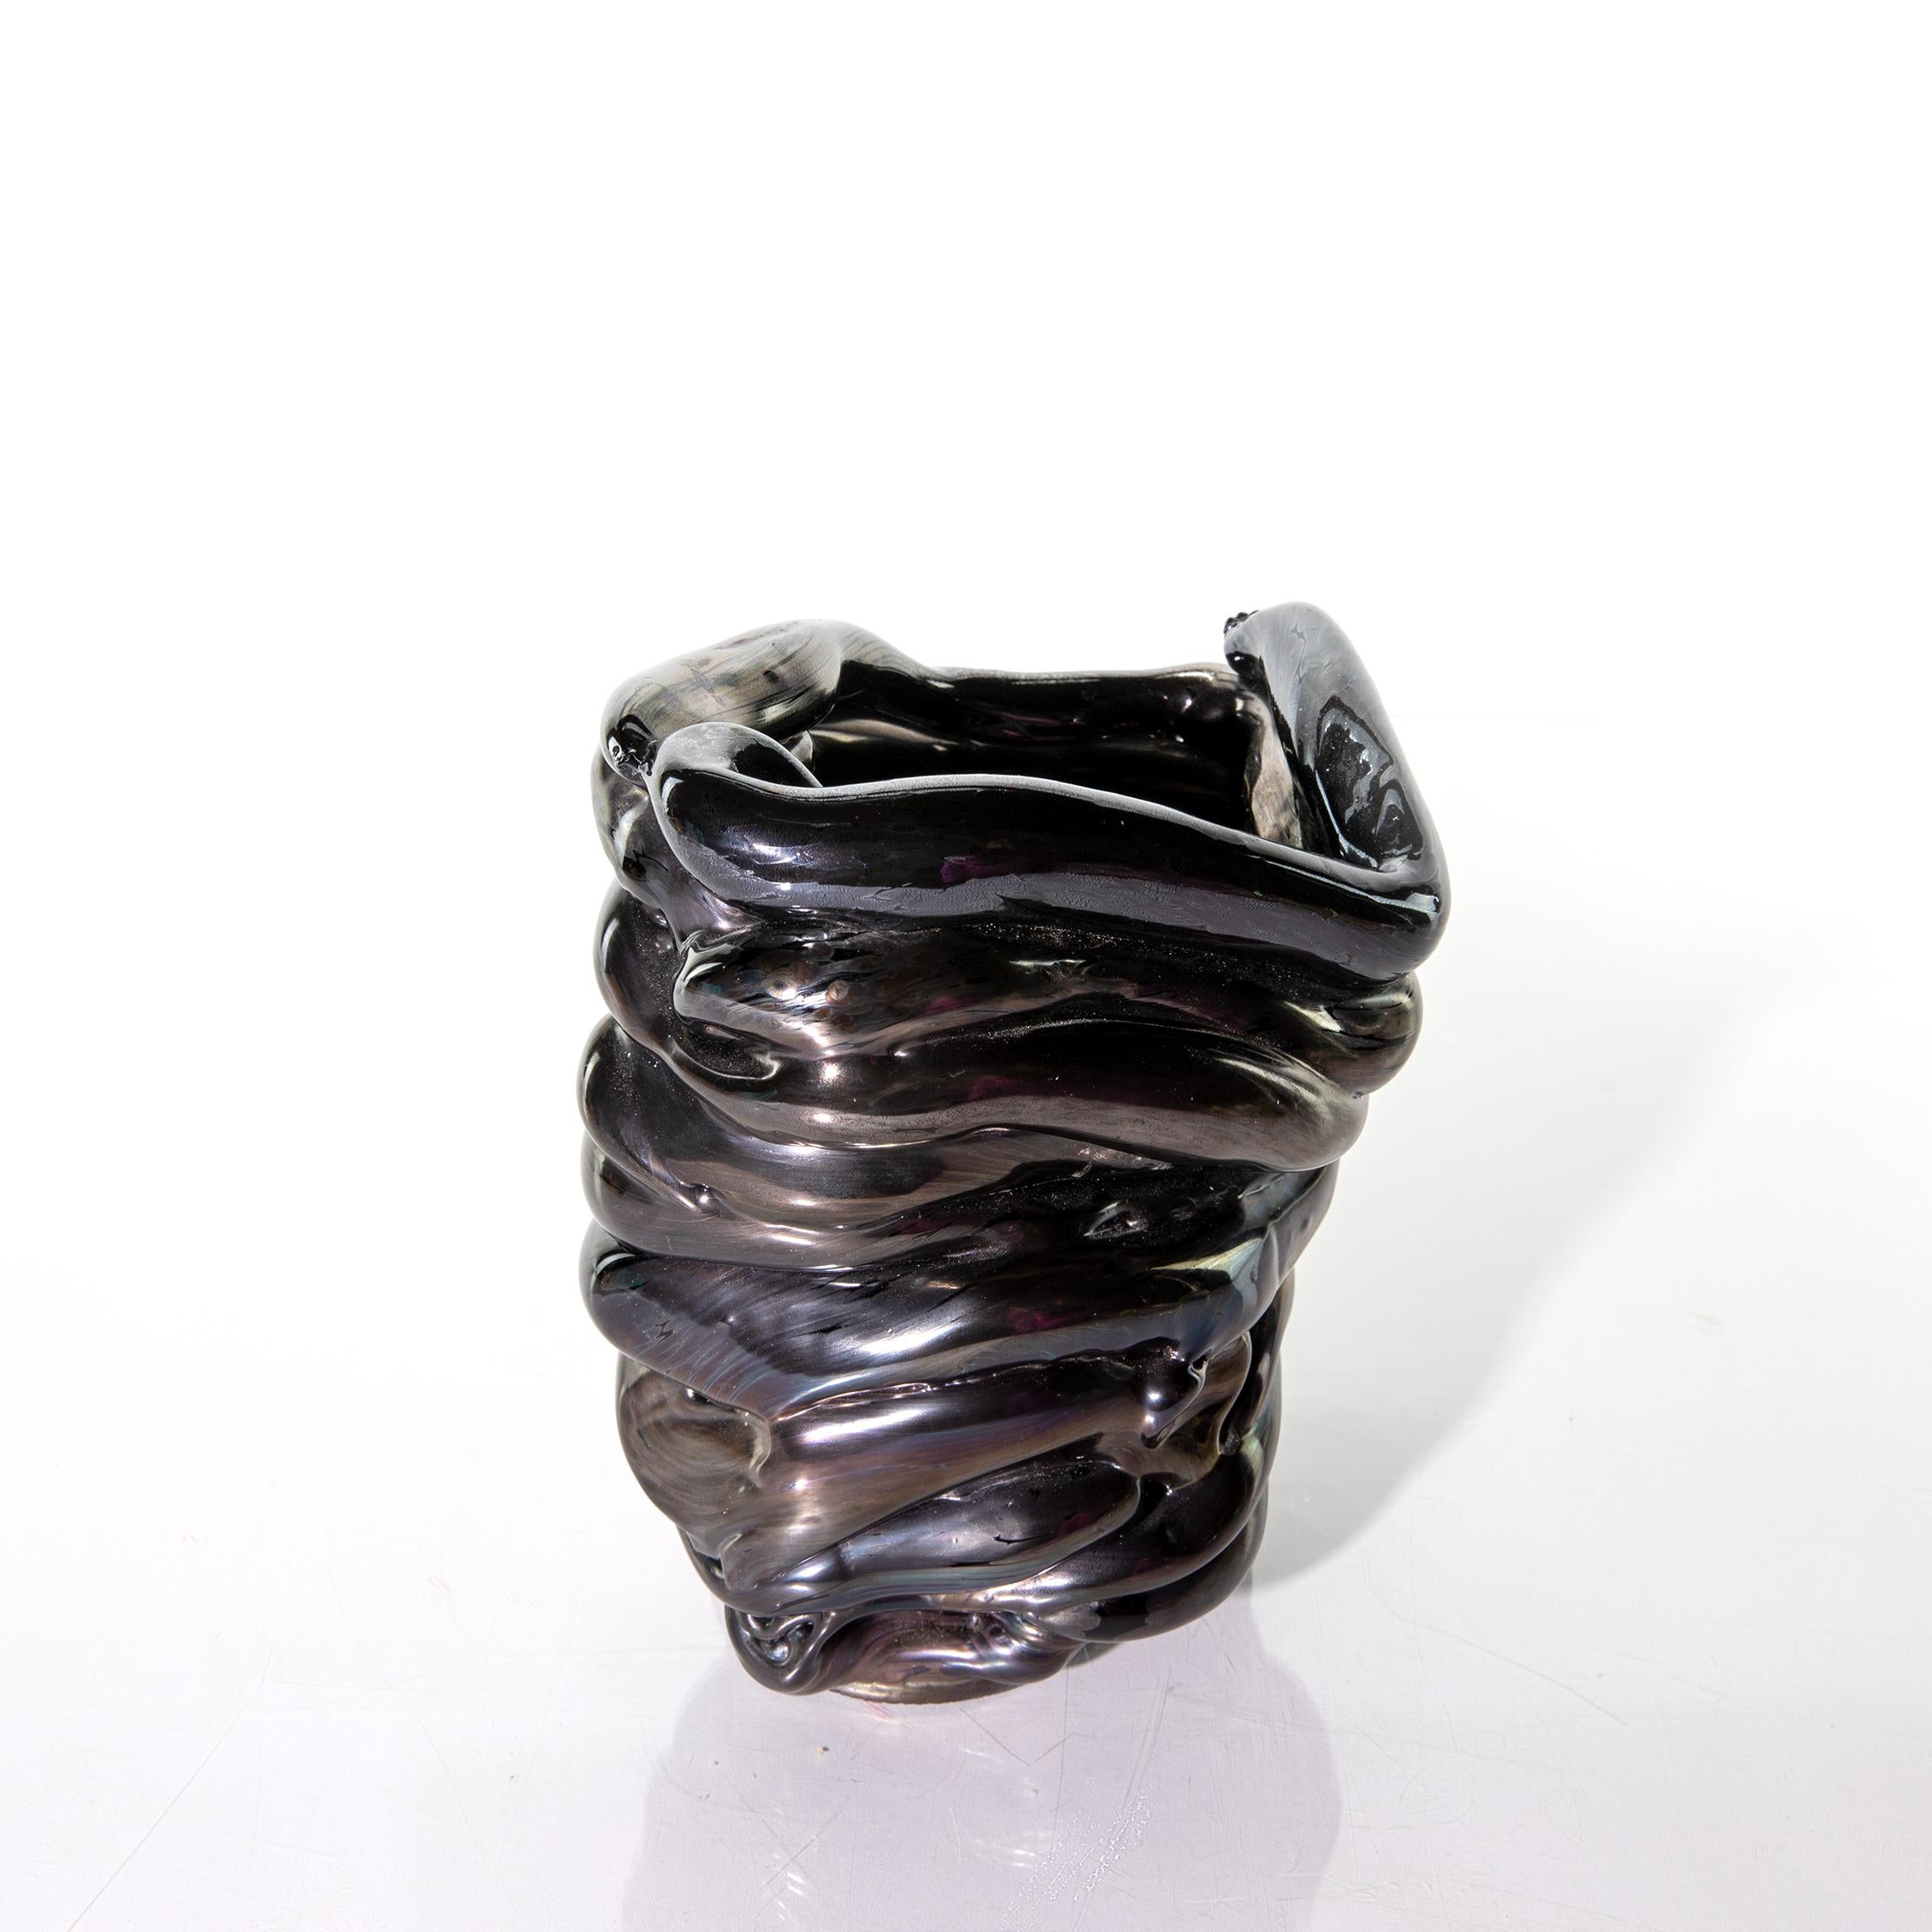 Made of black iridescent glass, this solid sculpted coil vase was made by Romina Gonzales in 2014. Due to the nature of the making process, this sculpture is not water tight. 